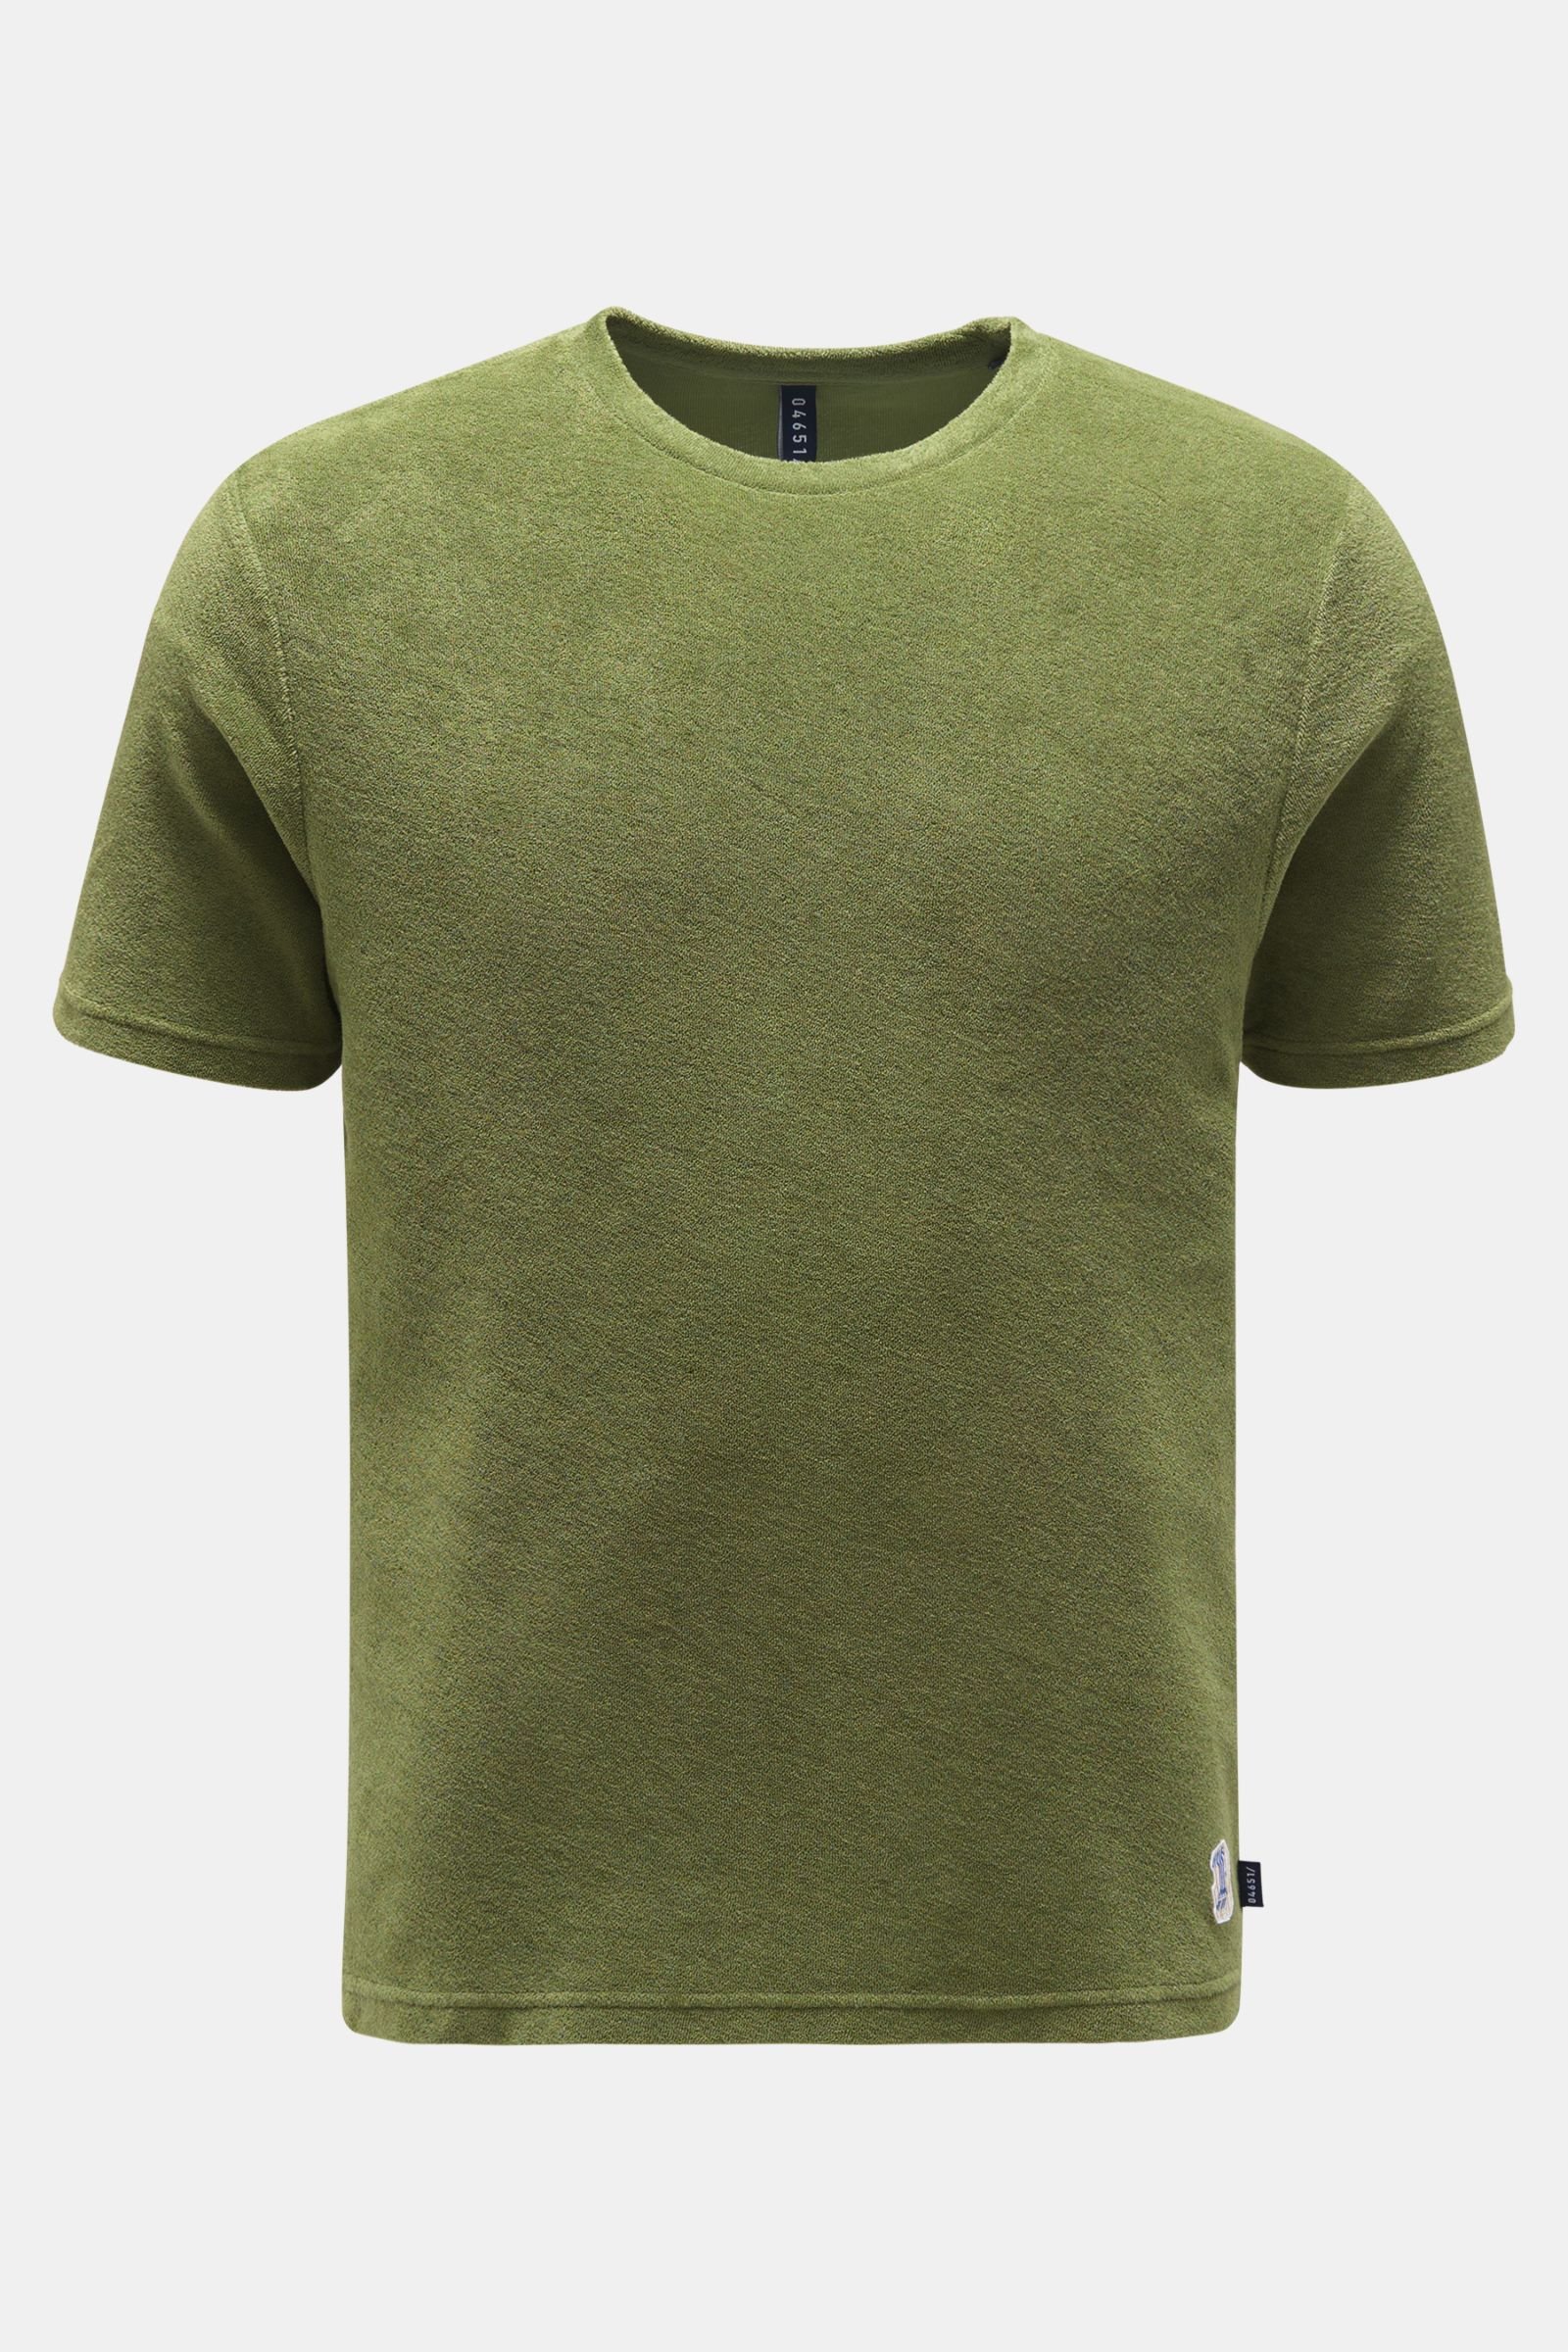 Crew neck terry T-shirt olive